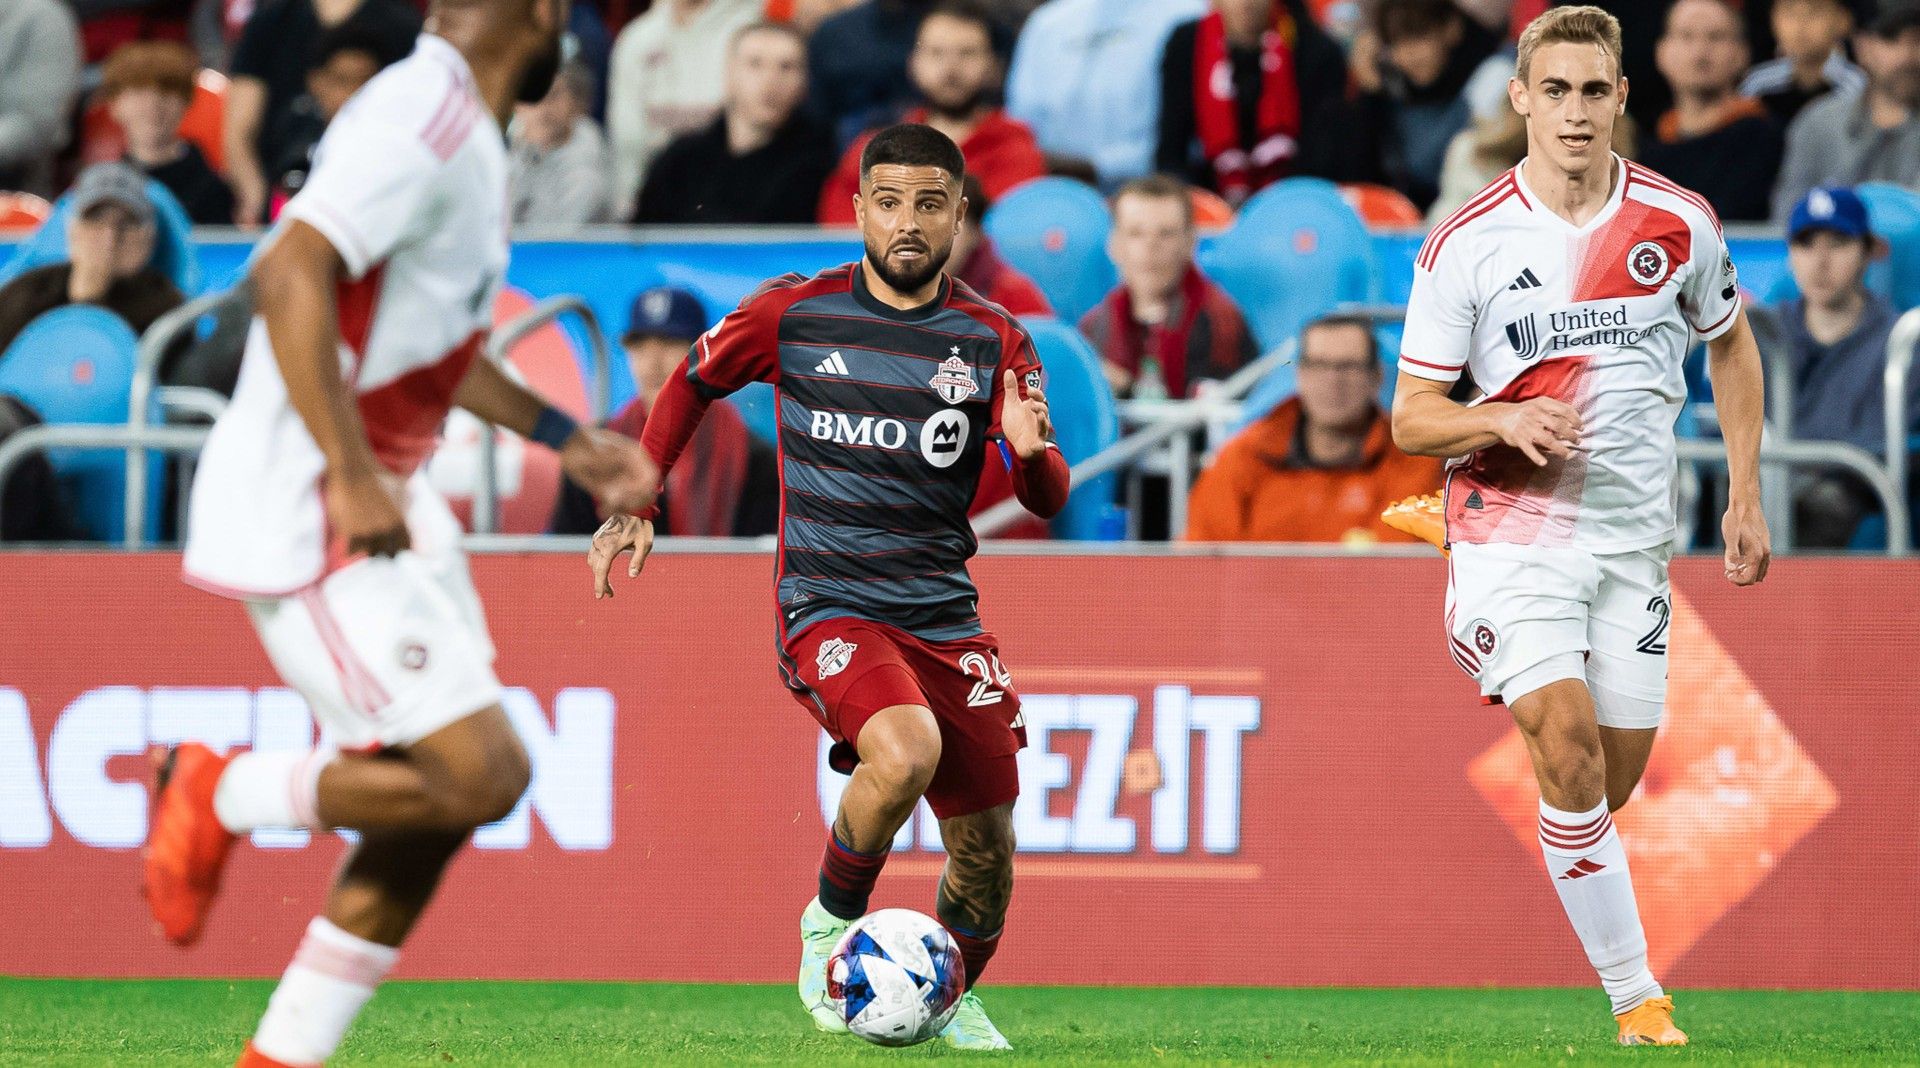 State of the Union: Consistency continues to elude TFC